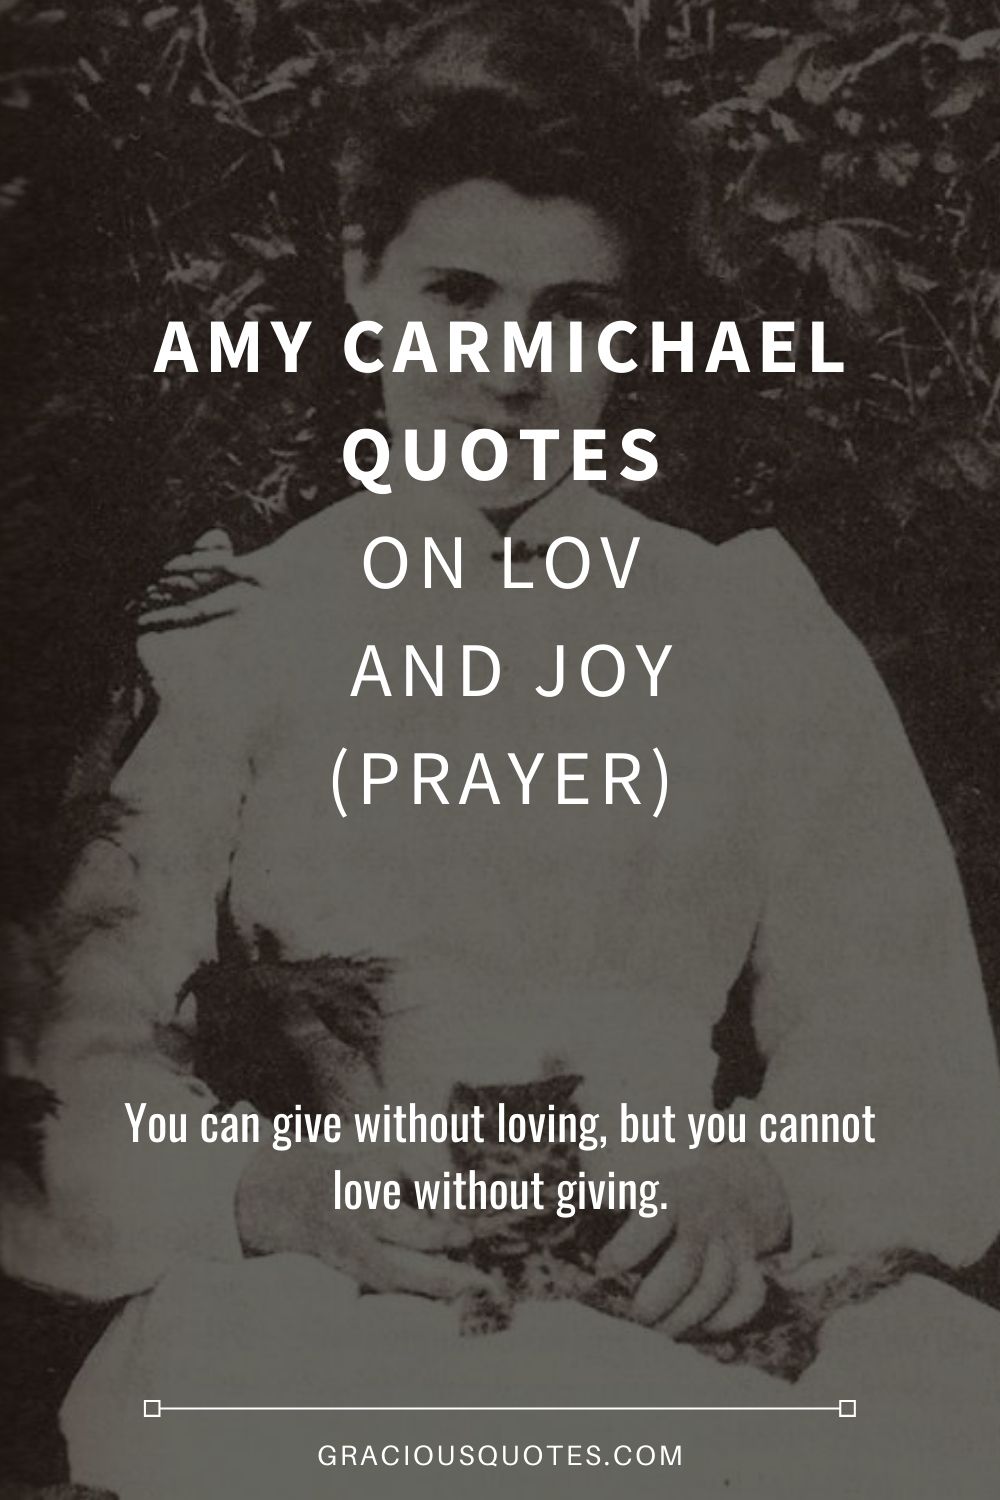 Amy Carmichael Quotes on Lov and Joy (PRAYER) - Gracious Quotes